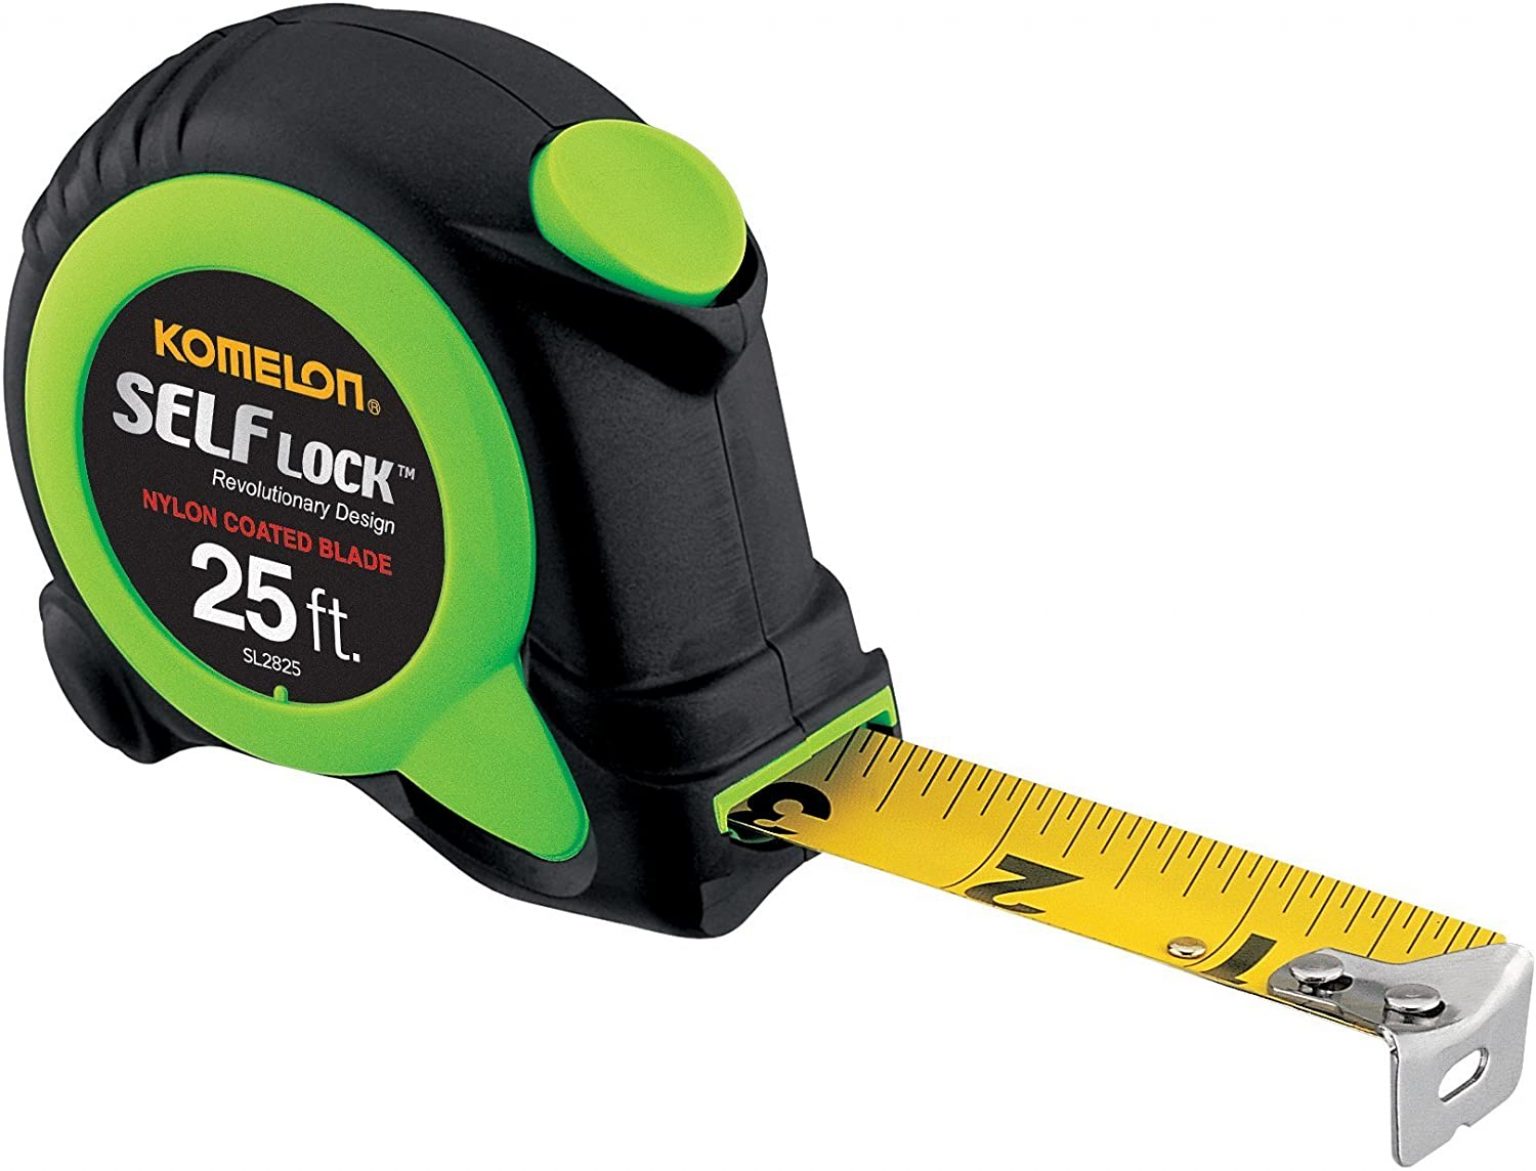 Best Tape Measure In 2021 Unbiased Review & Buying Guide